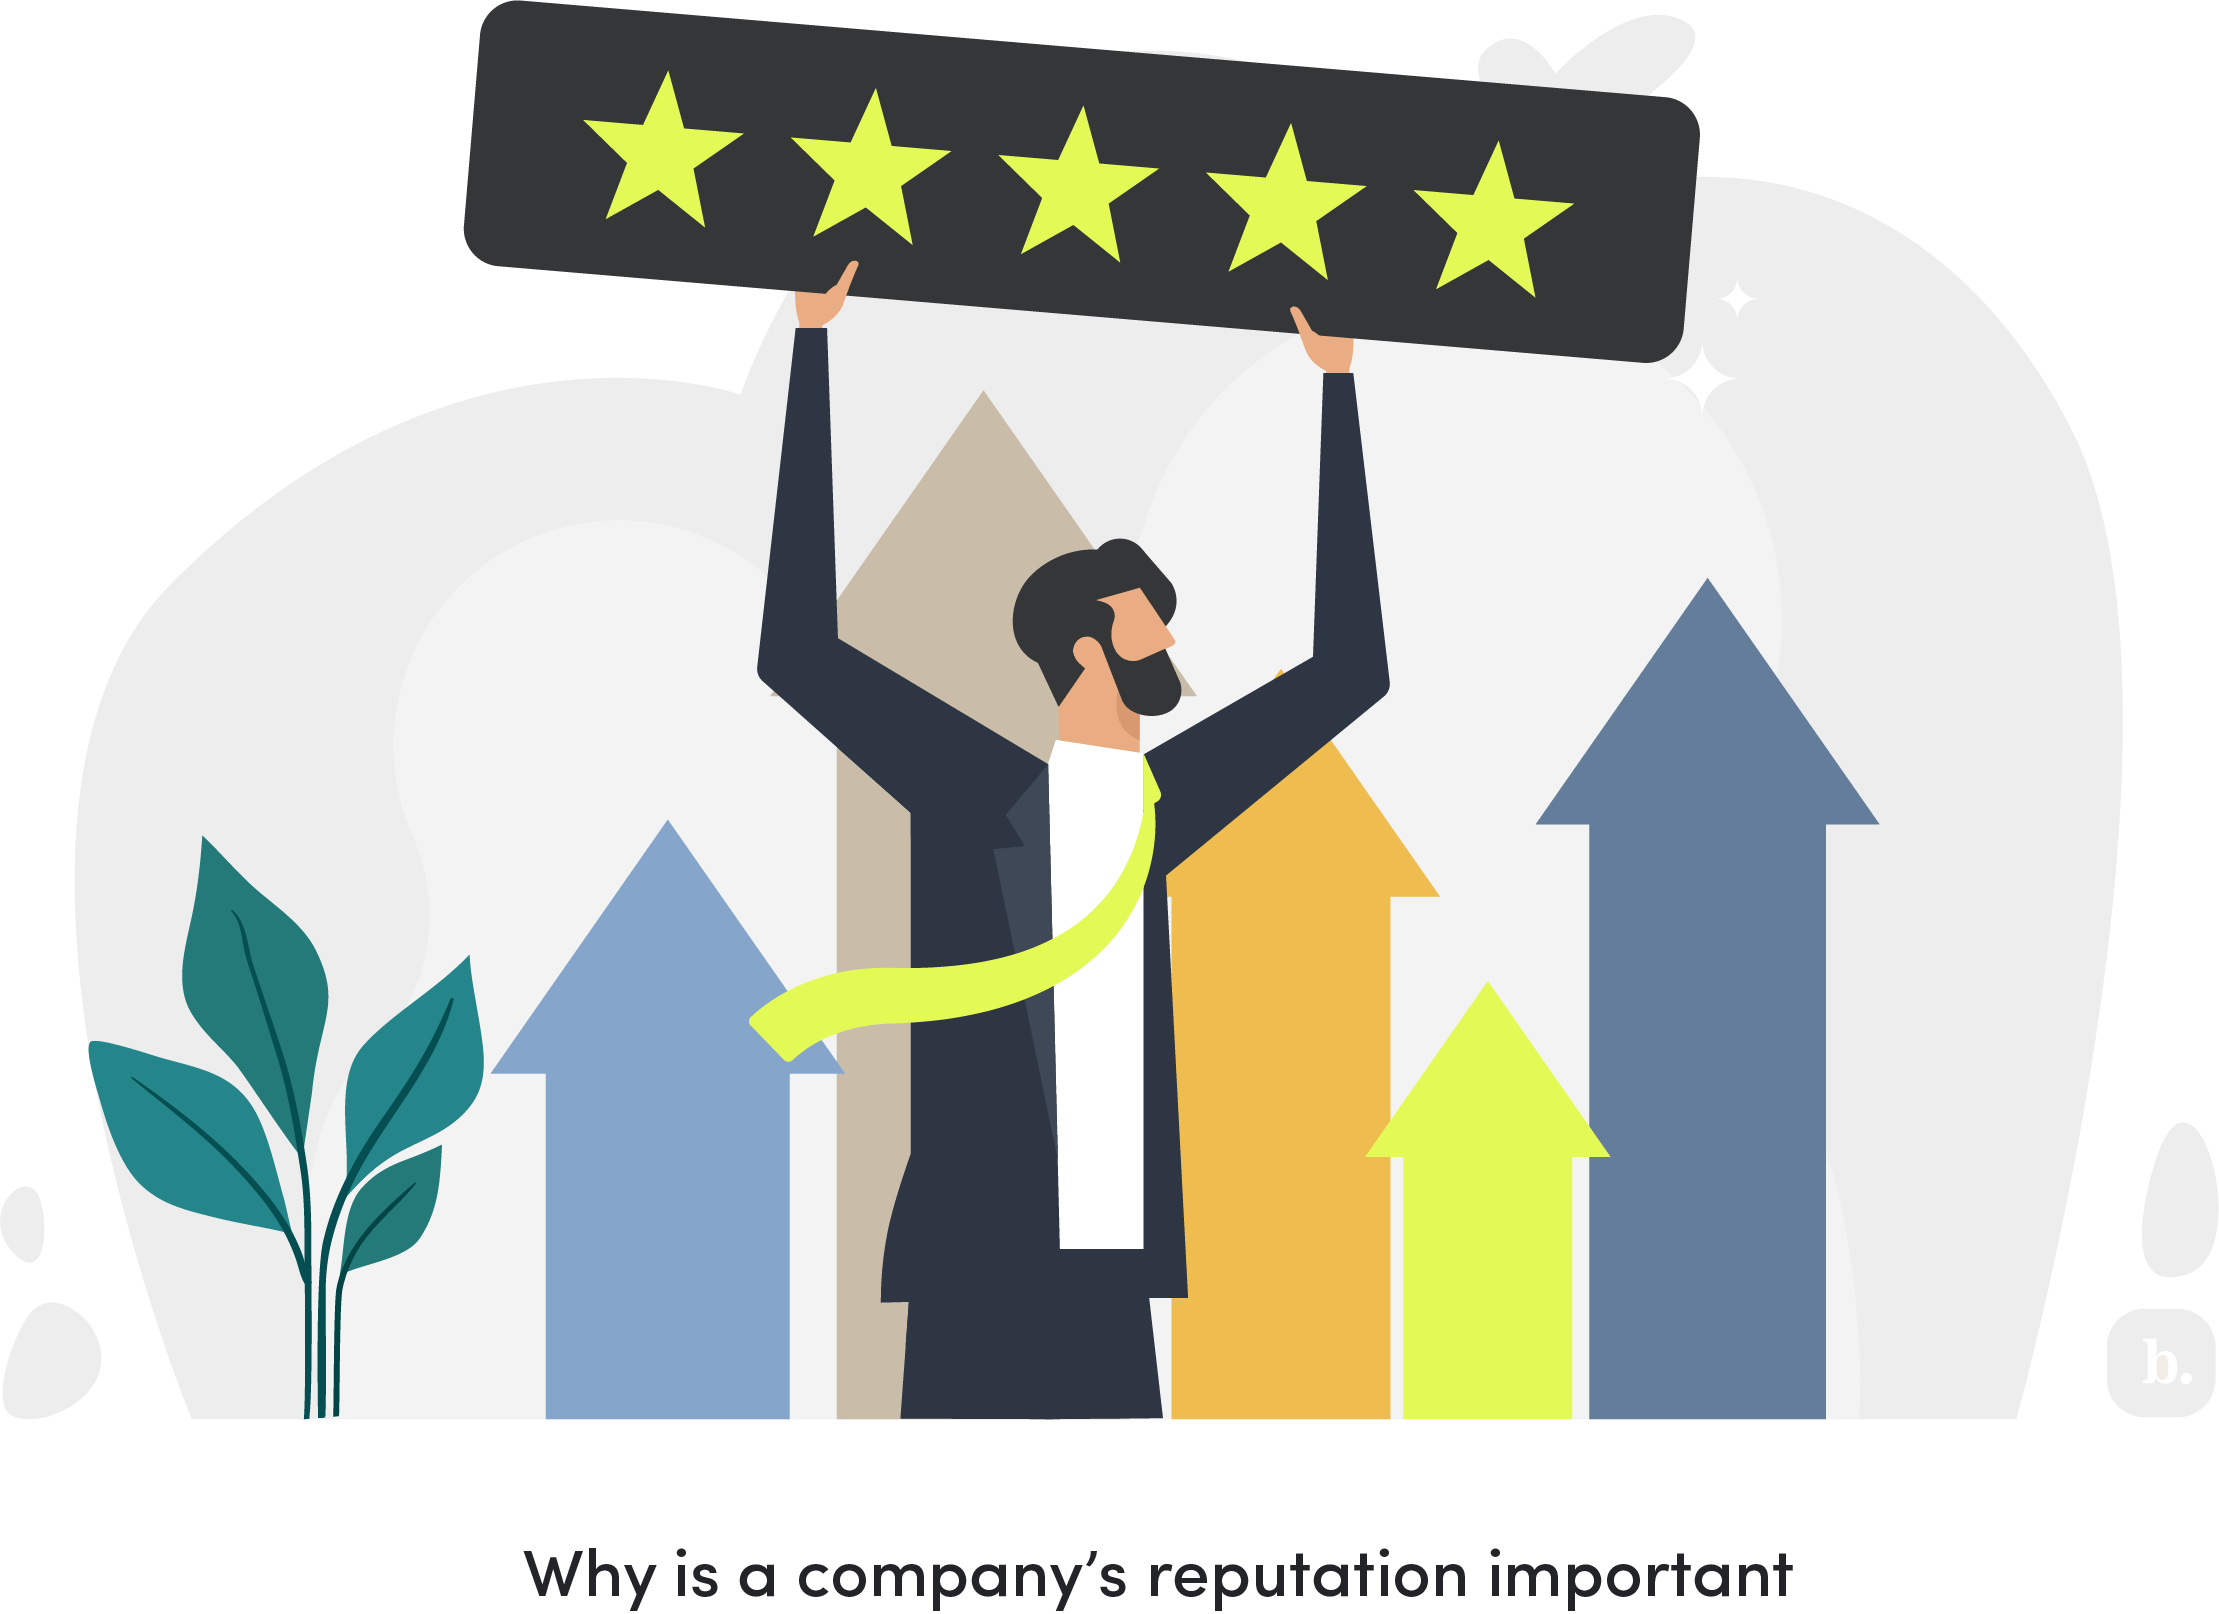 graphic of a person holding up a 5 star rating sign